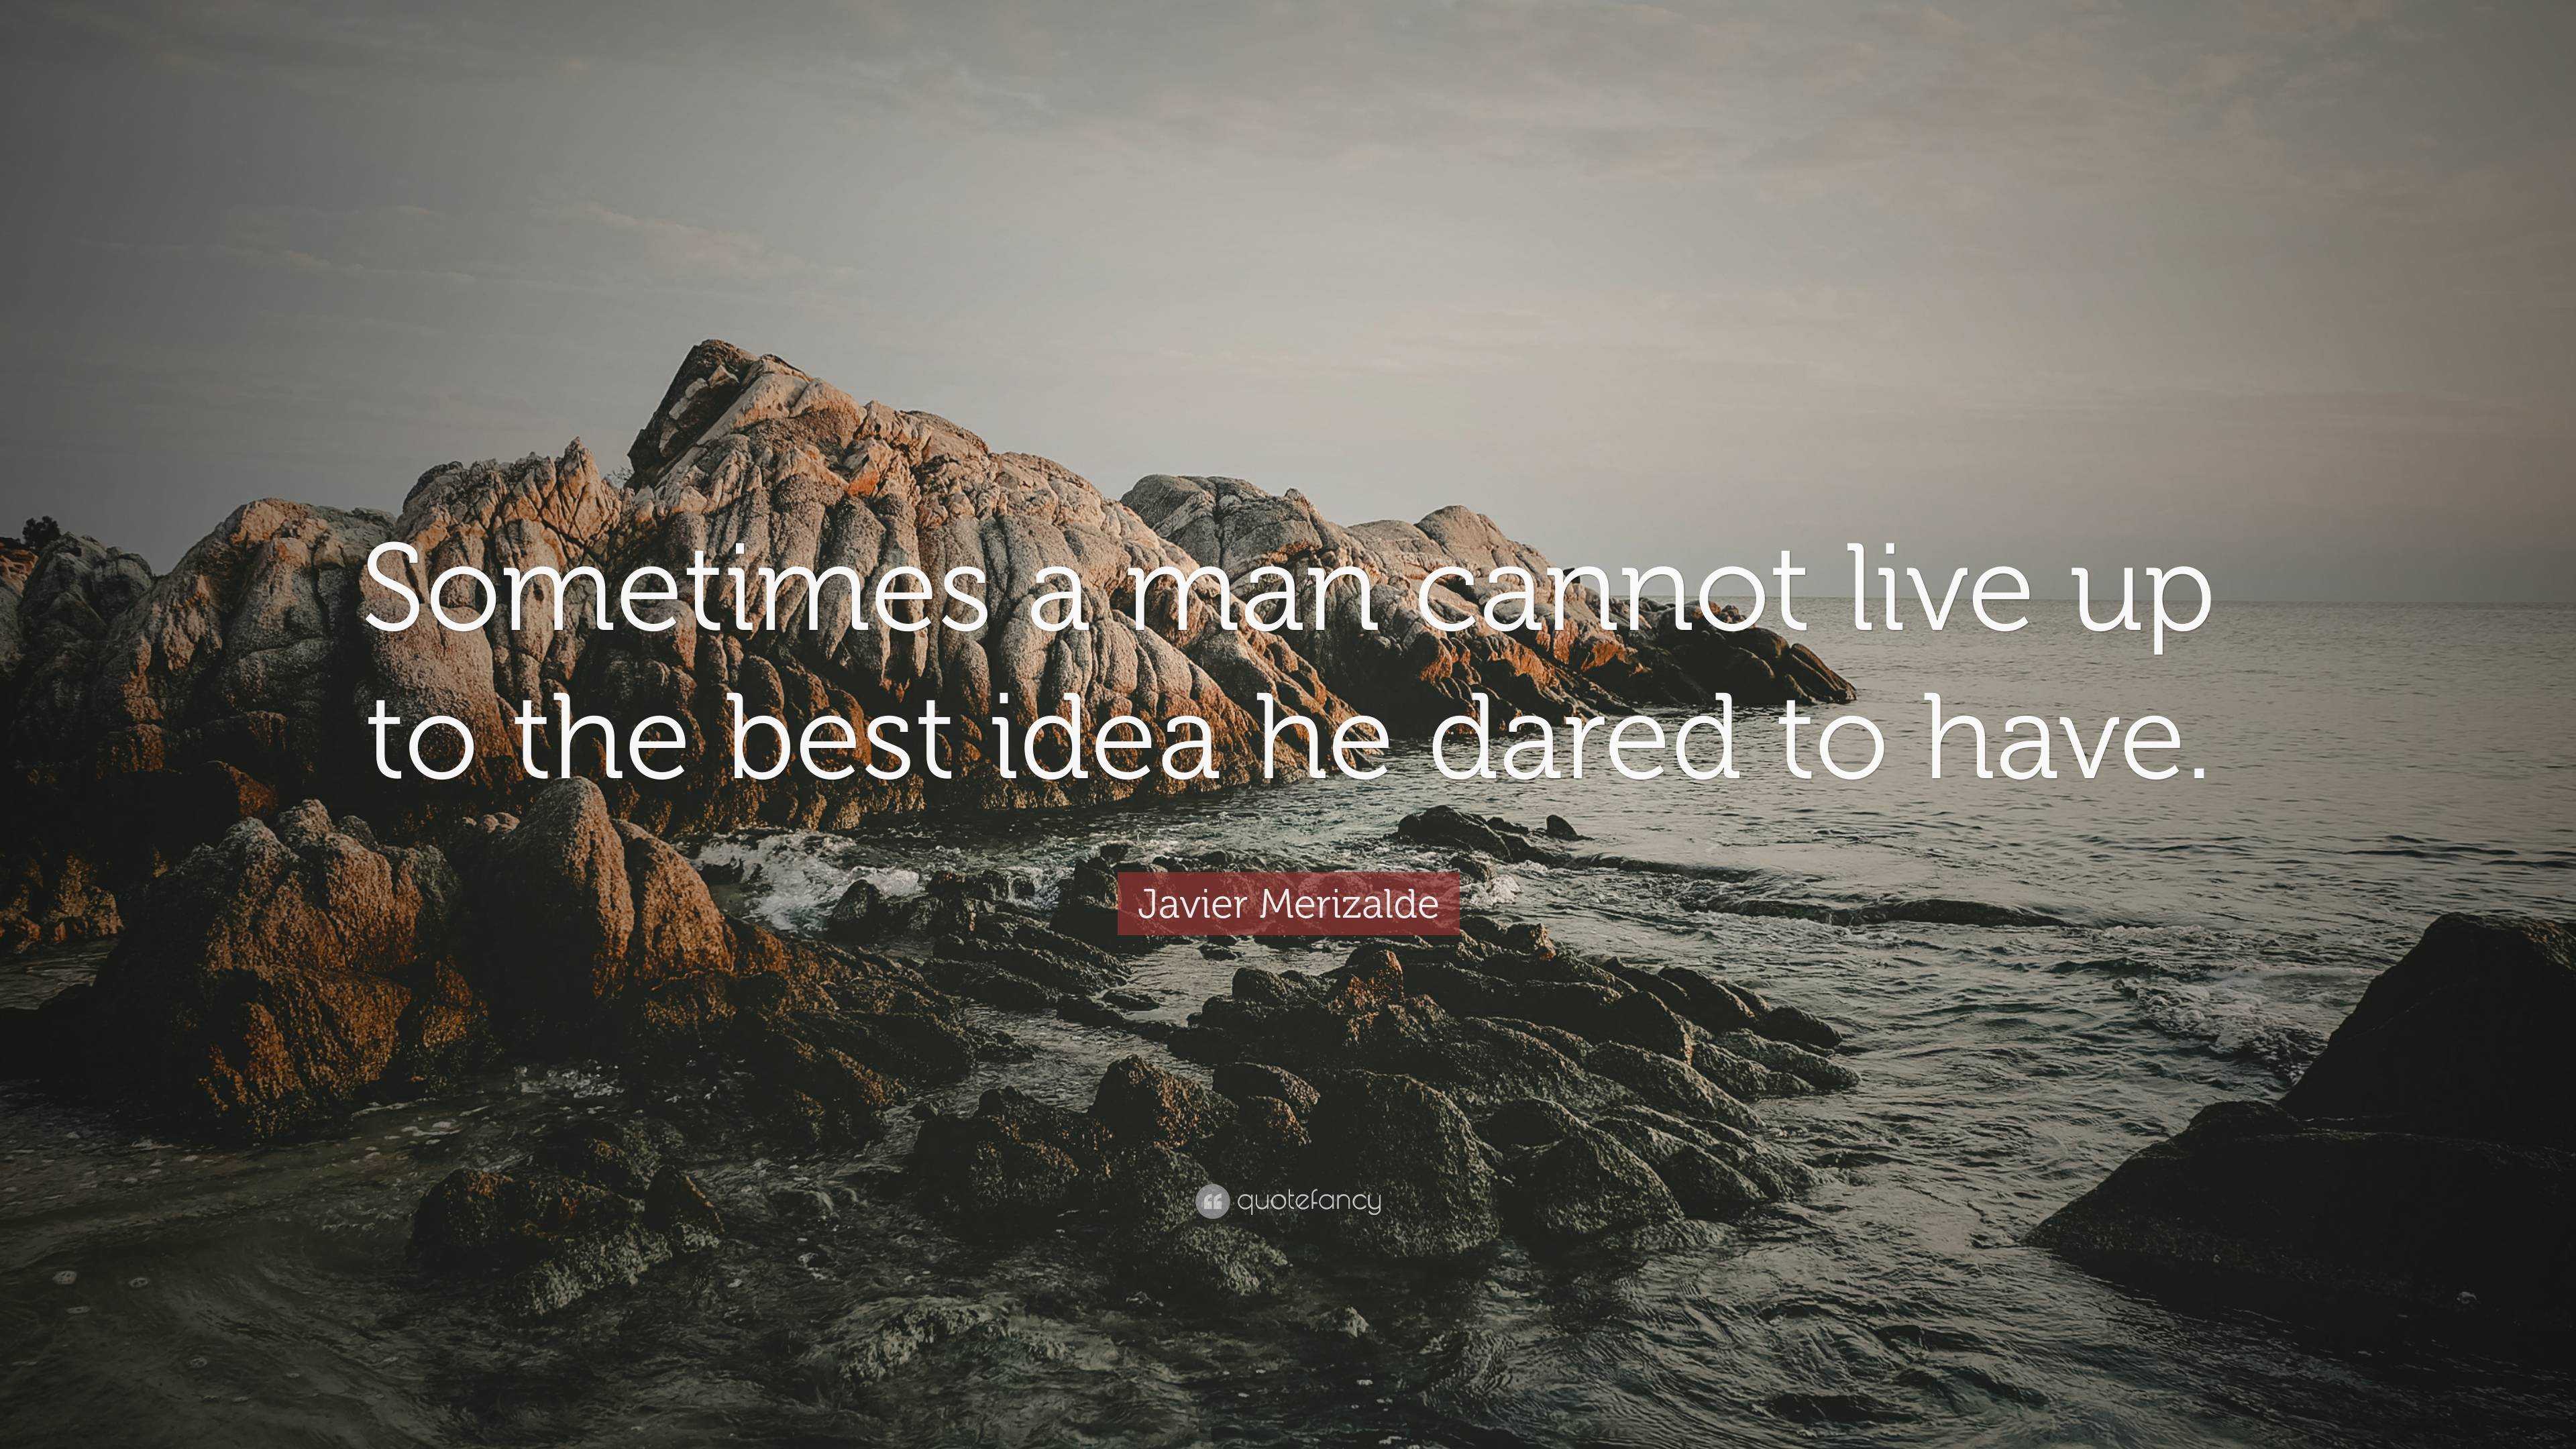 Javier Merizalde Quote: “Sometimes a man cannot live up to the best ...